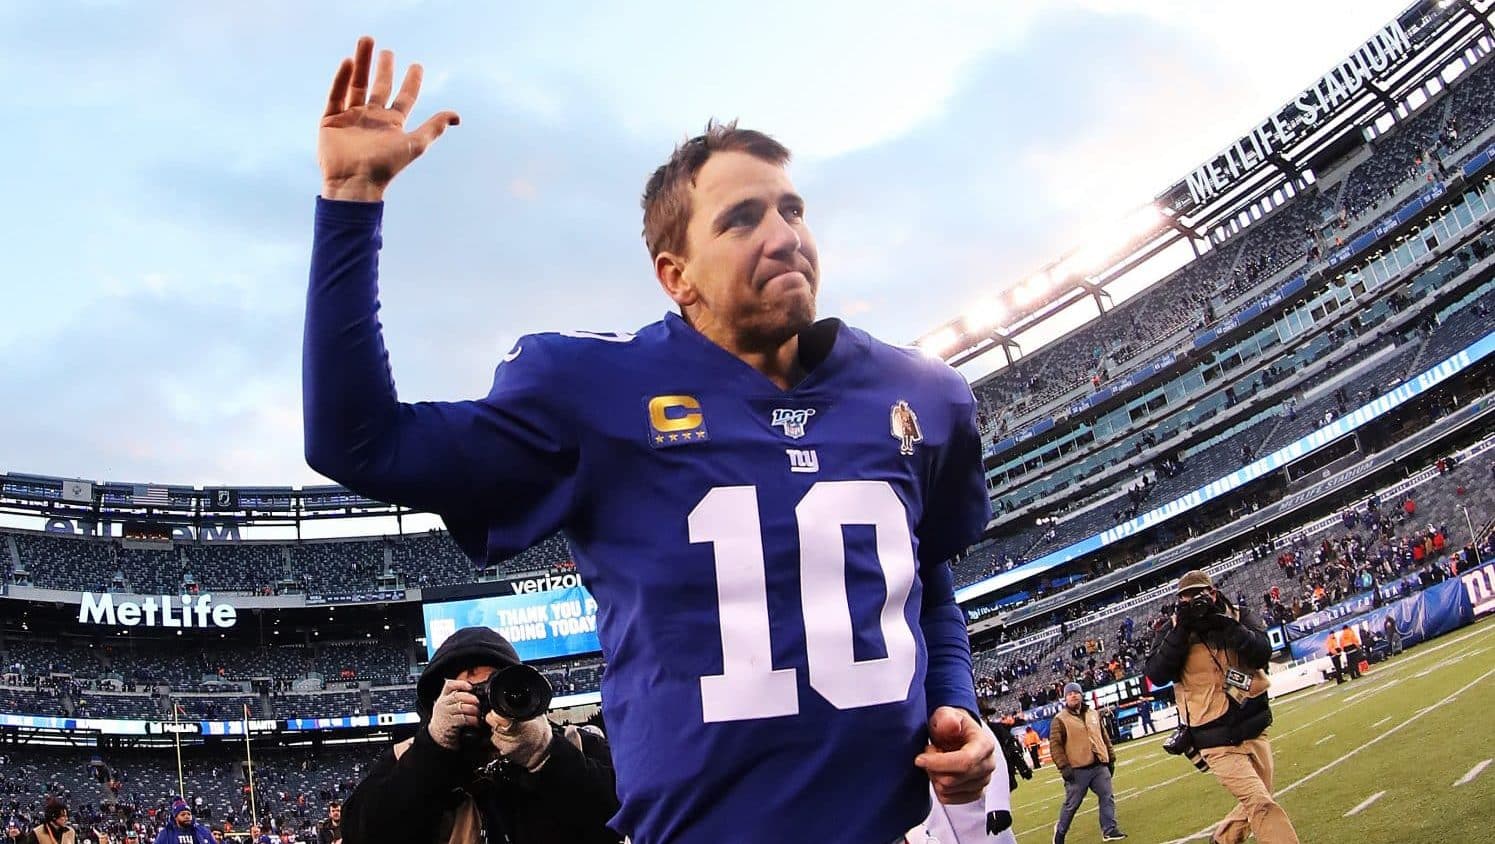 EAST RUTHERFORD, NEW JERSEY - DECEMBER 15: Eli Manning #10 of the New York Giants waves to the crowd after his 31-13 win against the Miami Dolphins during their game at MetLife Stadium on December 15, 2019 in East Rutherford, New Jersey.